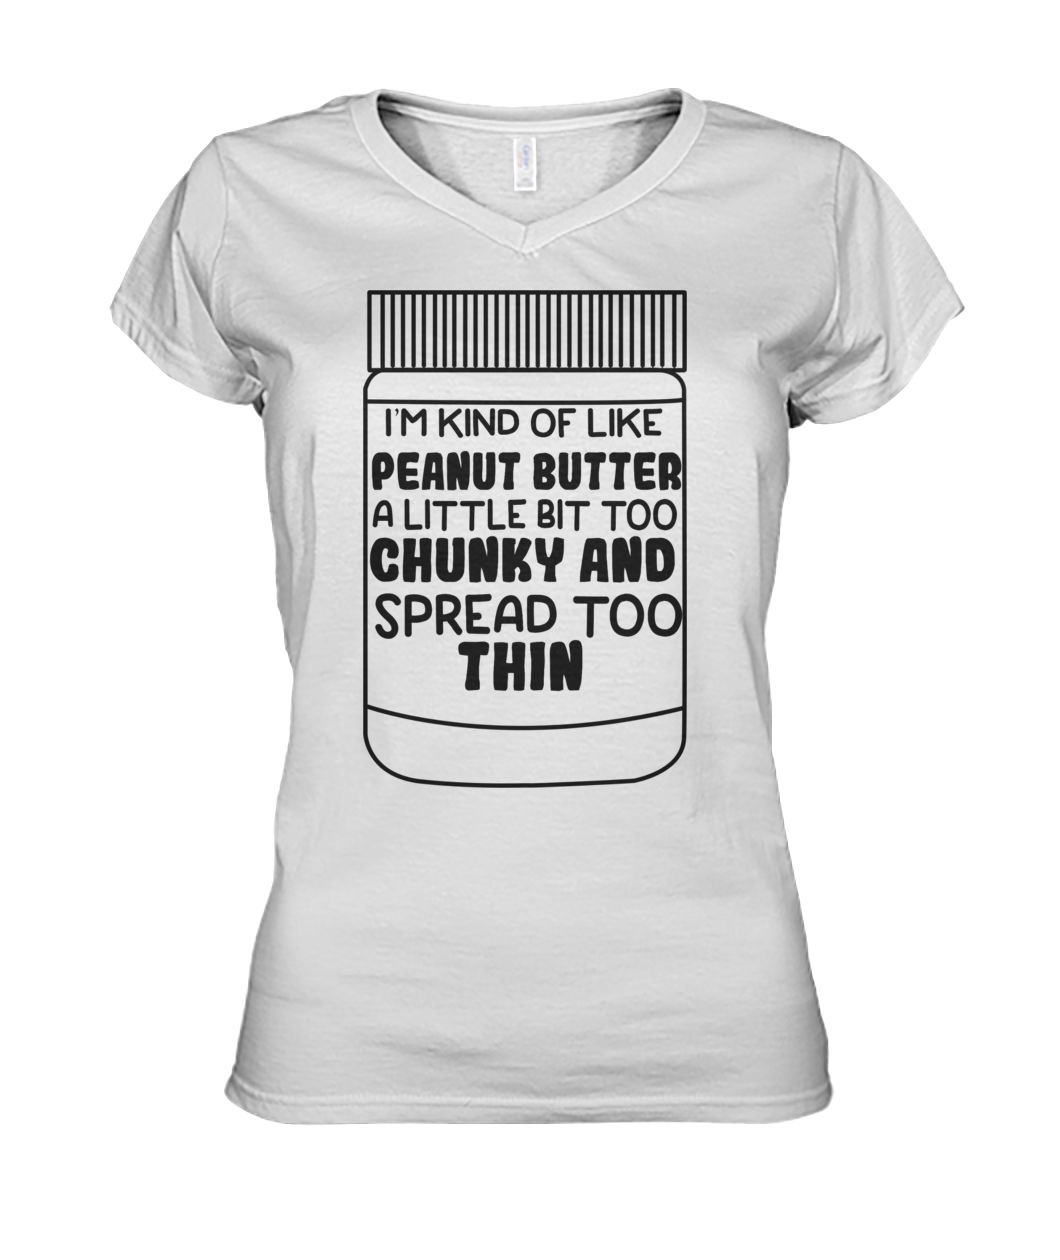 I'm kind of like peanut butter a little bit too chunky and spread too thin women's v-neck